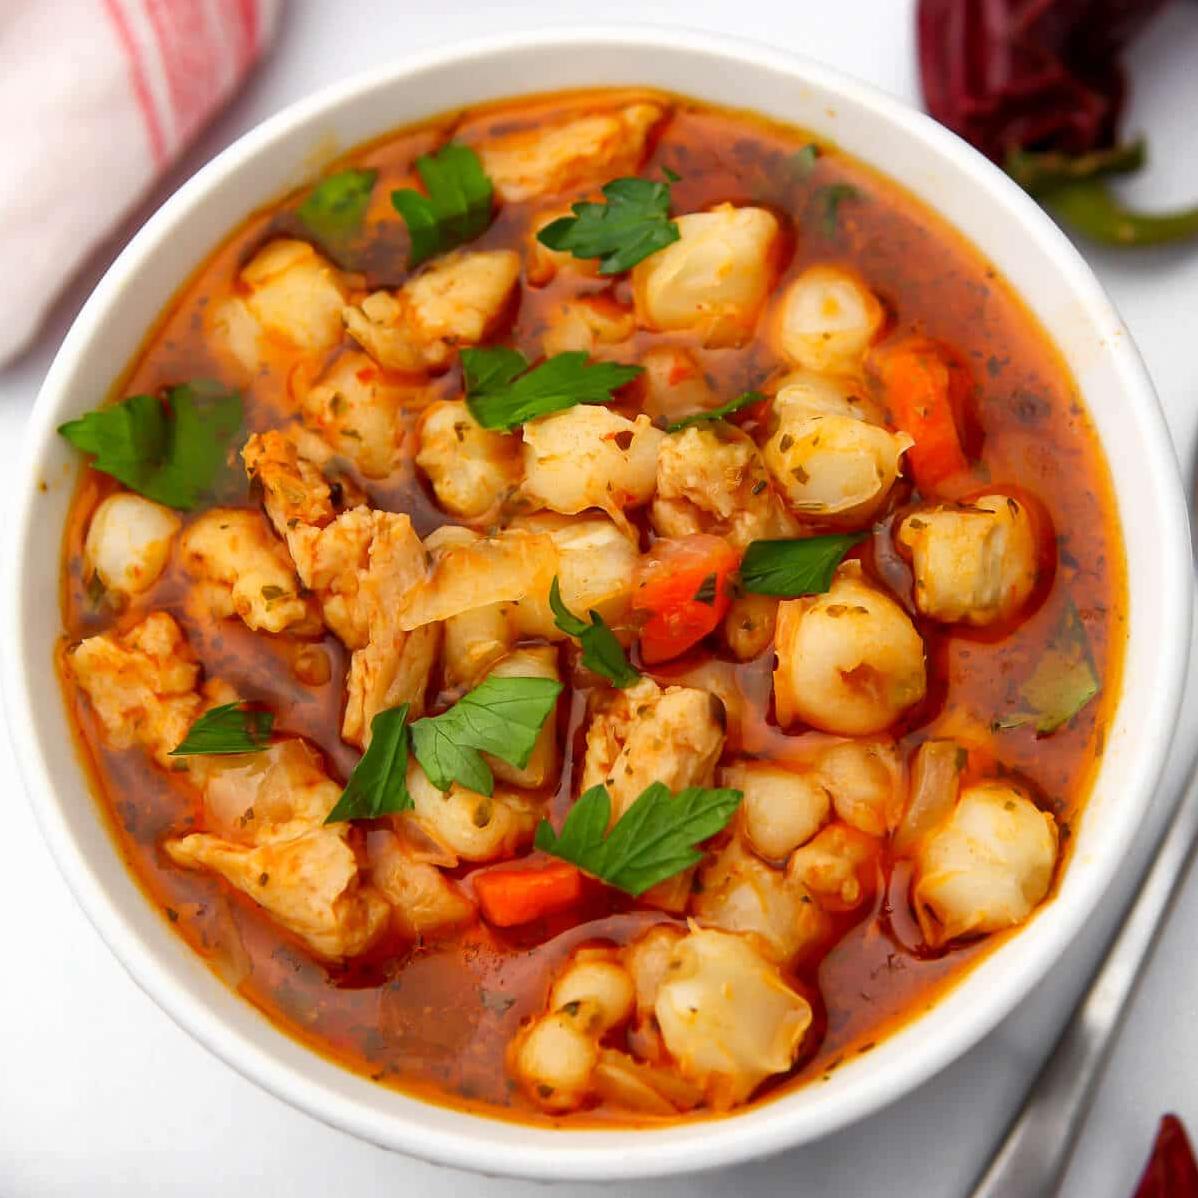  Spice up your day with vegetarian posole!